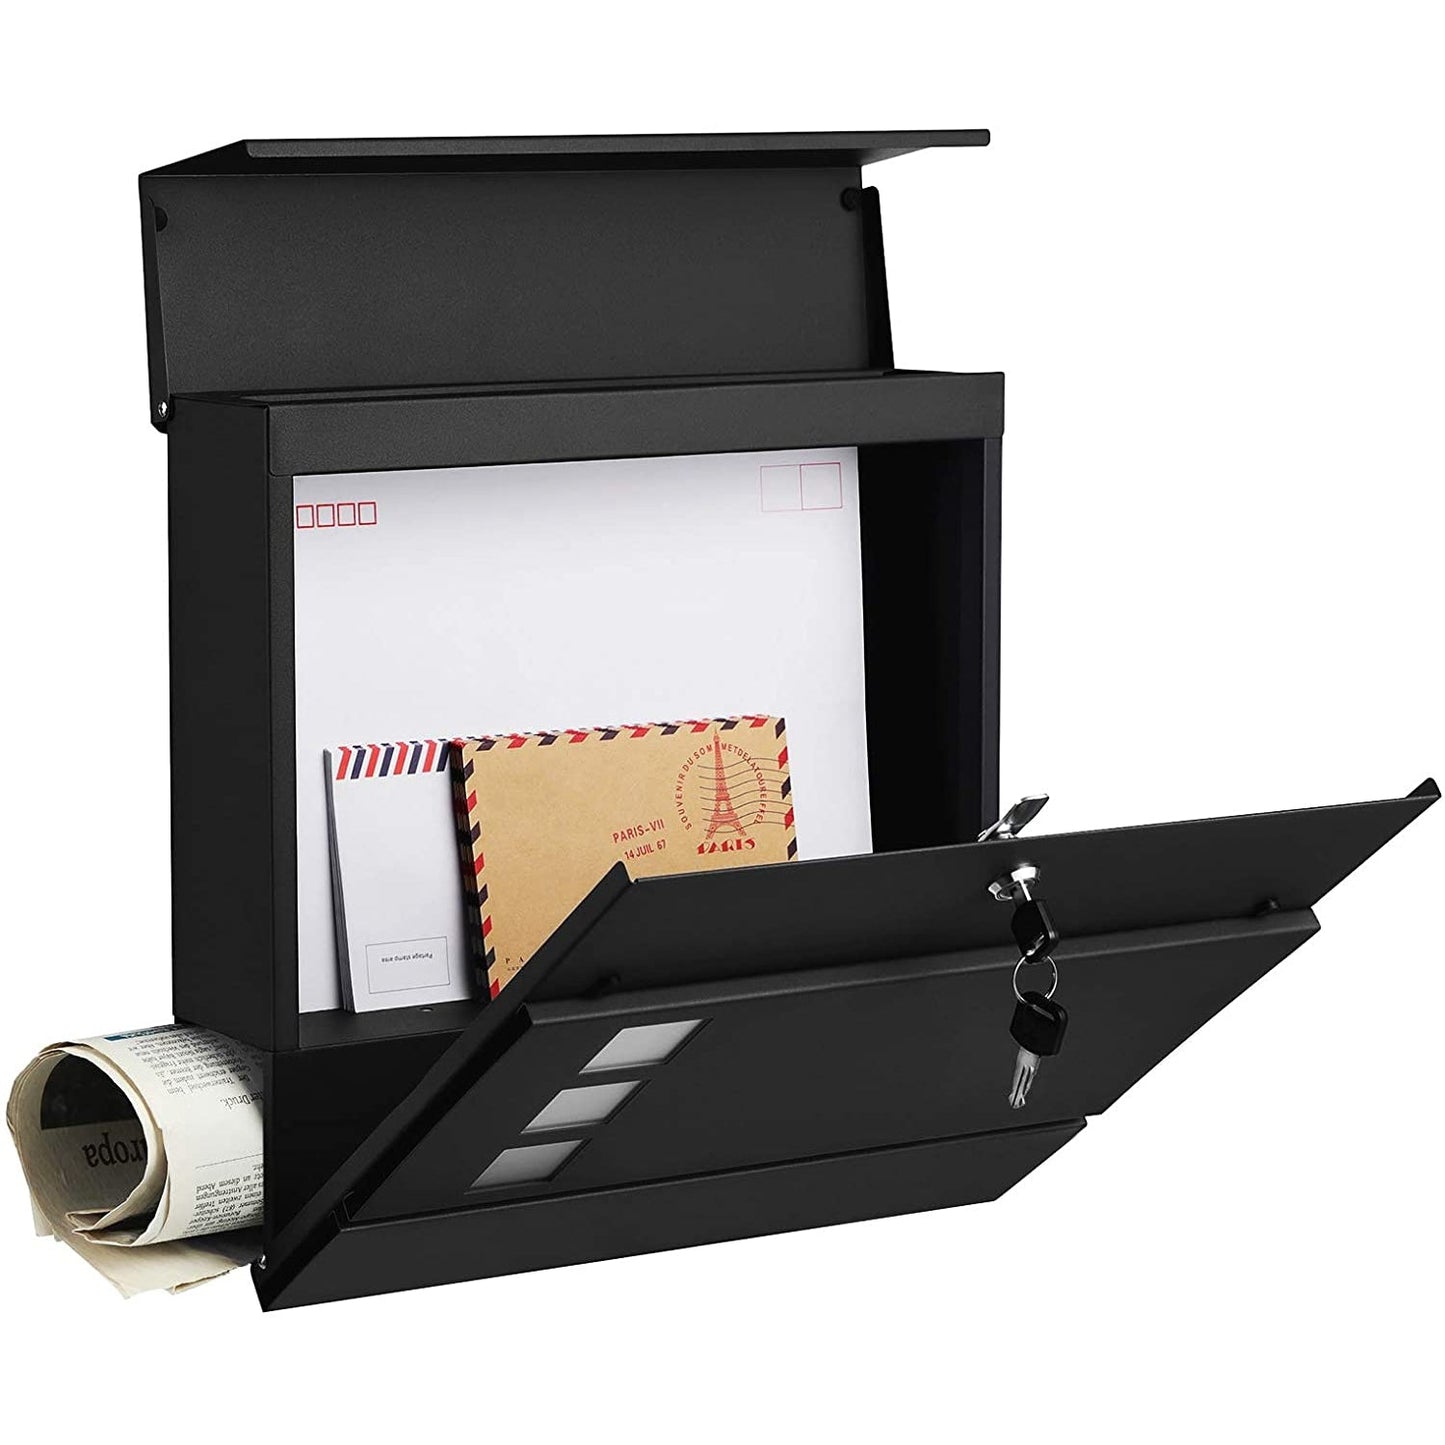 Nancy's Fordwich Letterbox - Wall letterbox - Wall mounting - Lockable - Newspaper compartment - Black - Metal - 37 x 10.5 x 37 cm